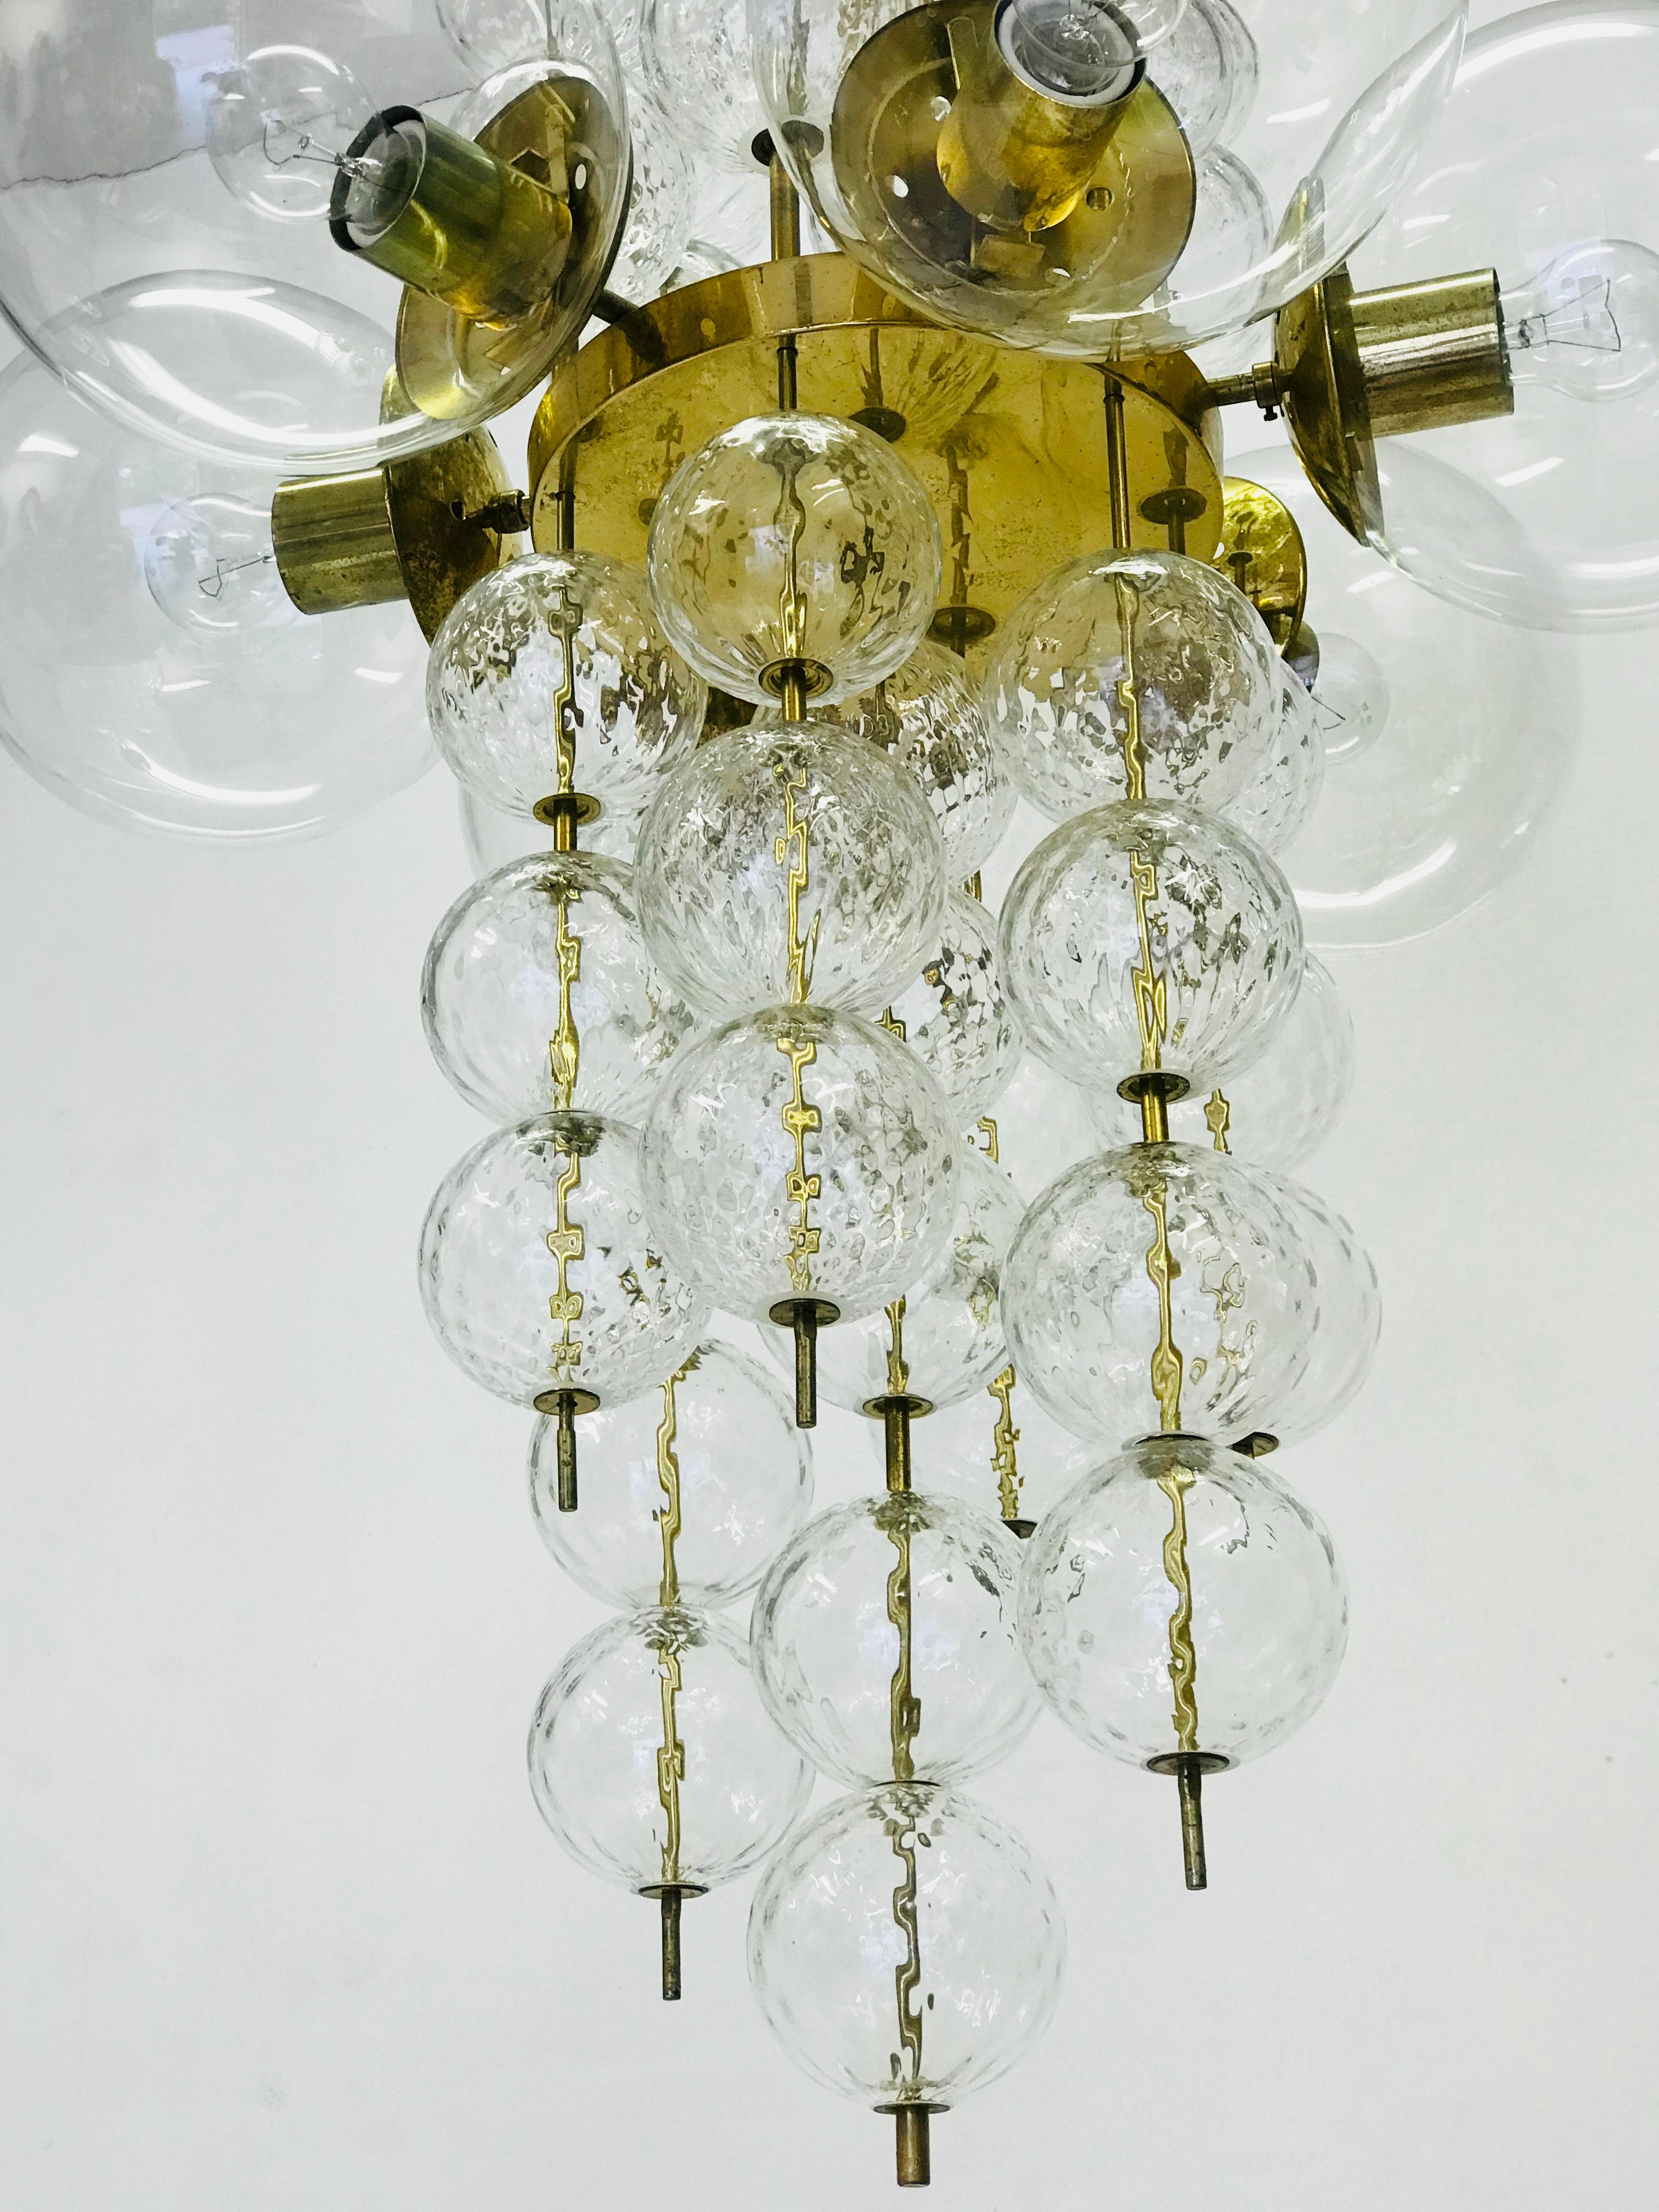 An unique chandelier from the 1965s. The brass construction is completed with the original patina. The glass balls are hand-blown. The conditions is very nice. The chandelier is fitted with ten glass spheres of 22 cm in diameter. Each arm has an